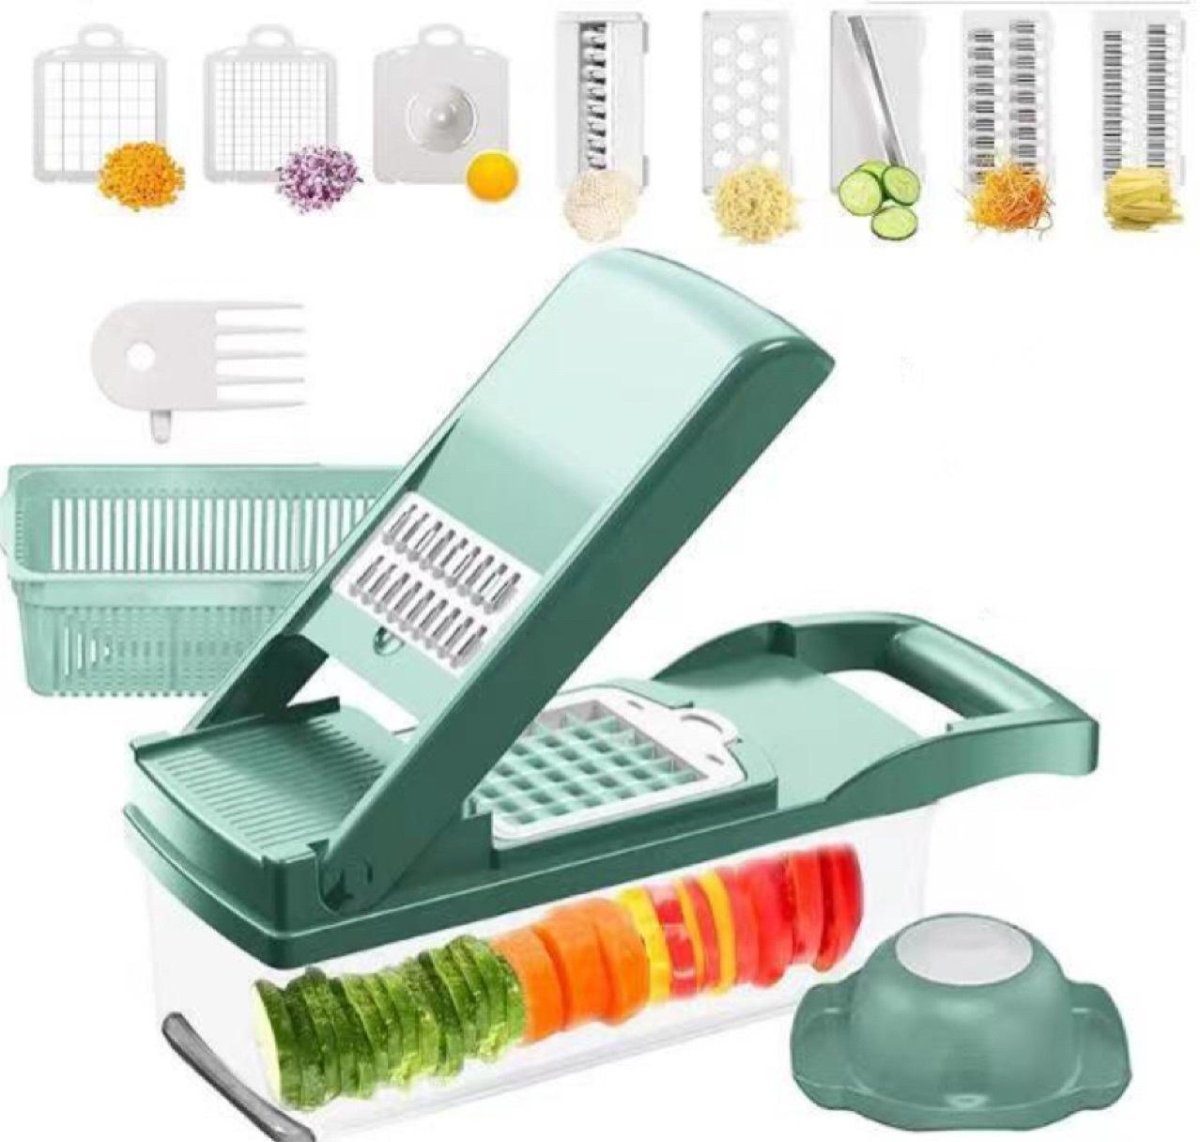 Multi-Function Manual Vegetable Chopper and Slicer - 12-in-1 Kitchen Tool for Chopping, Slicing, and Dicing Onions, Vegetables, and More - InspiredGrabs.com